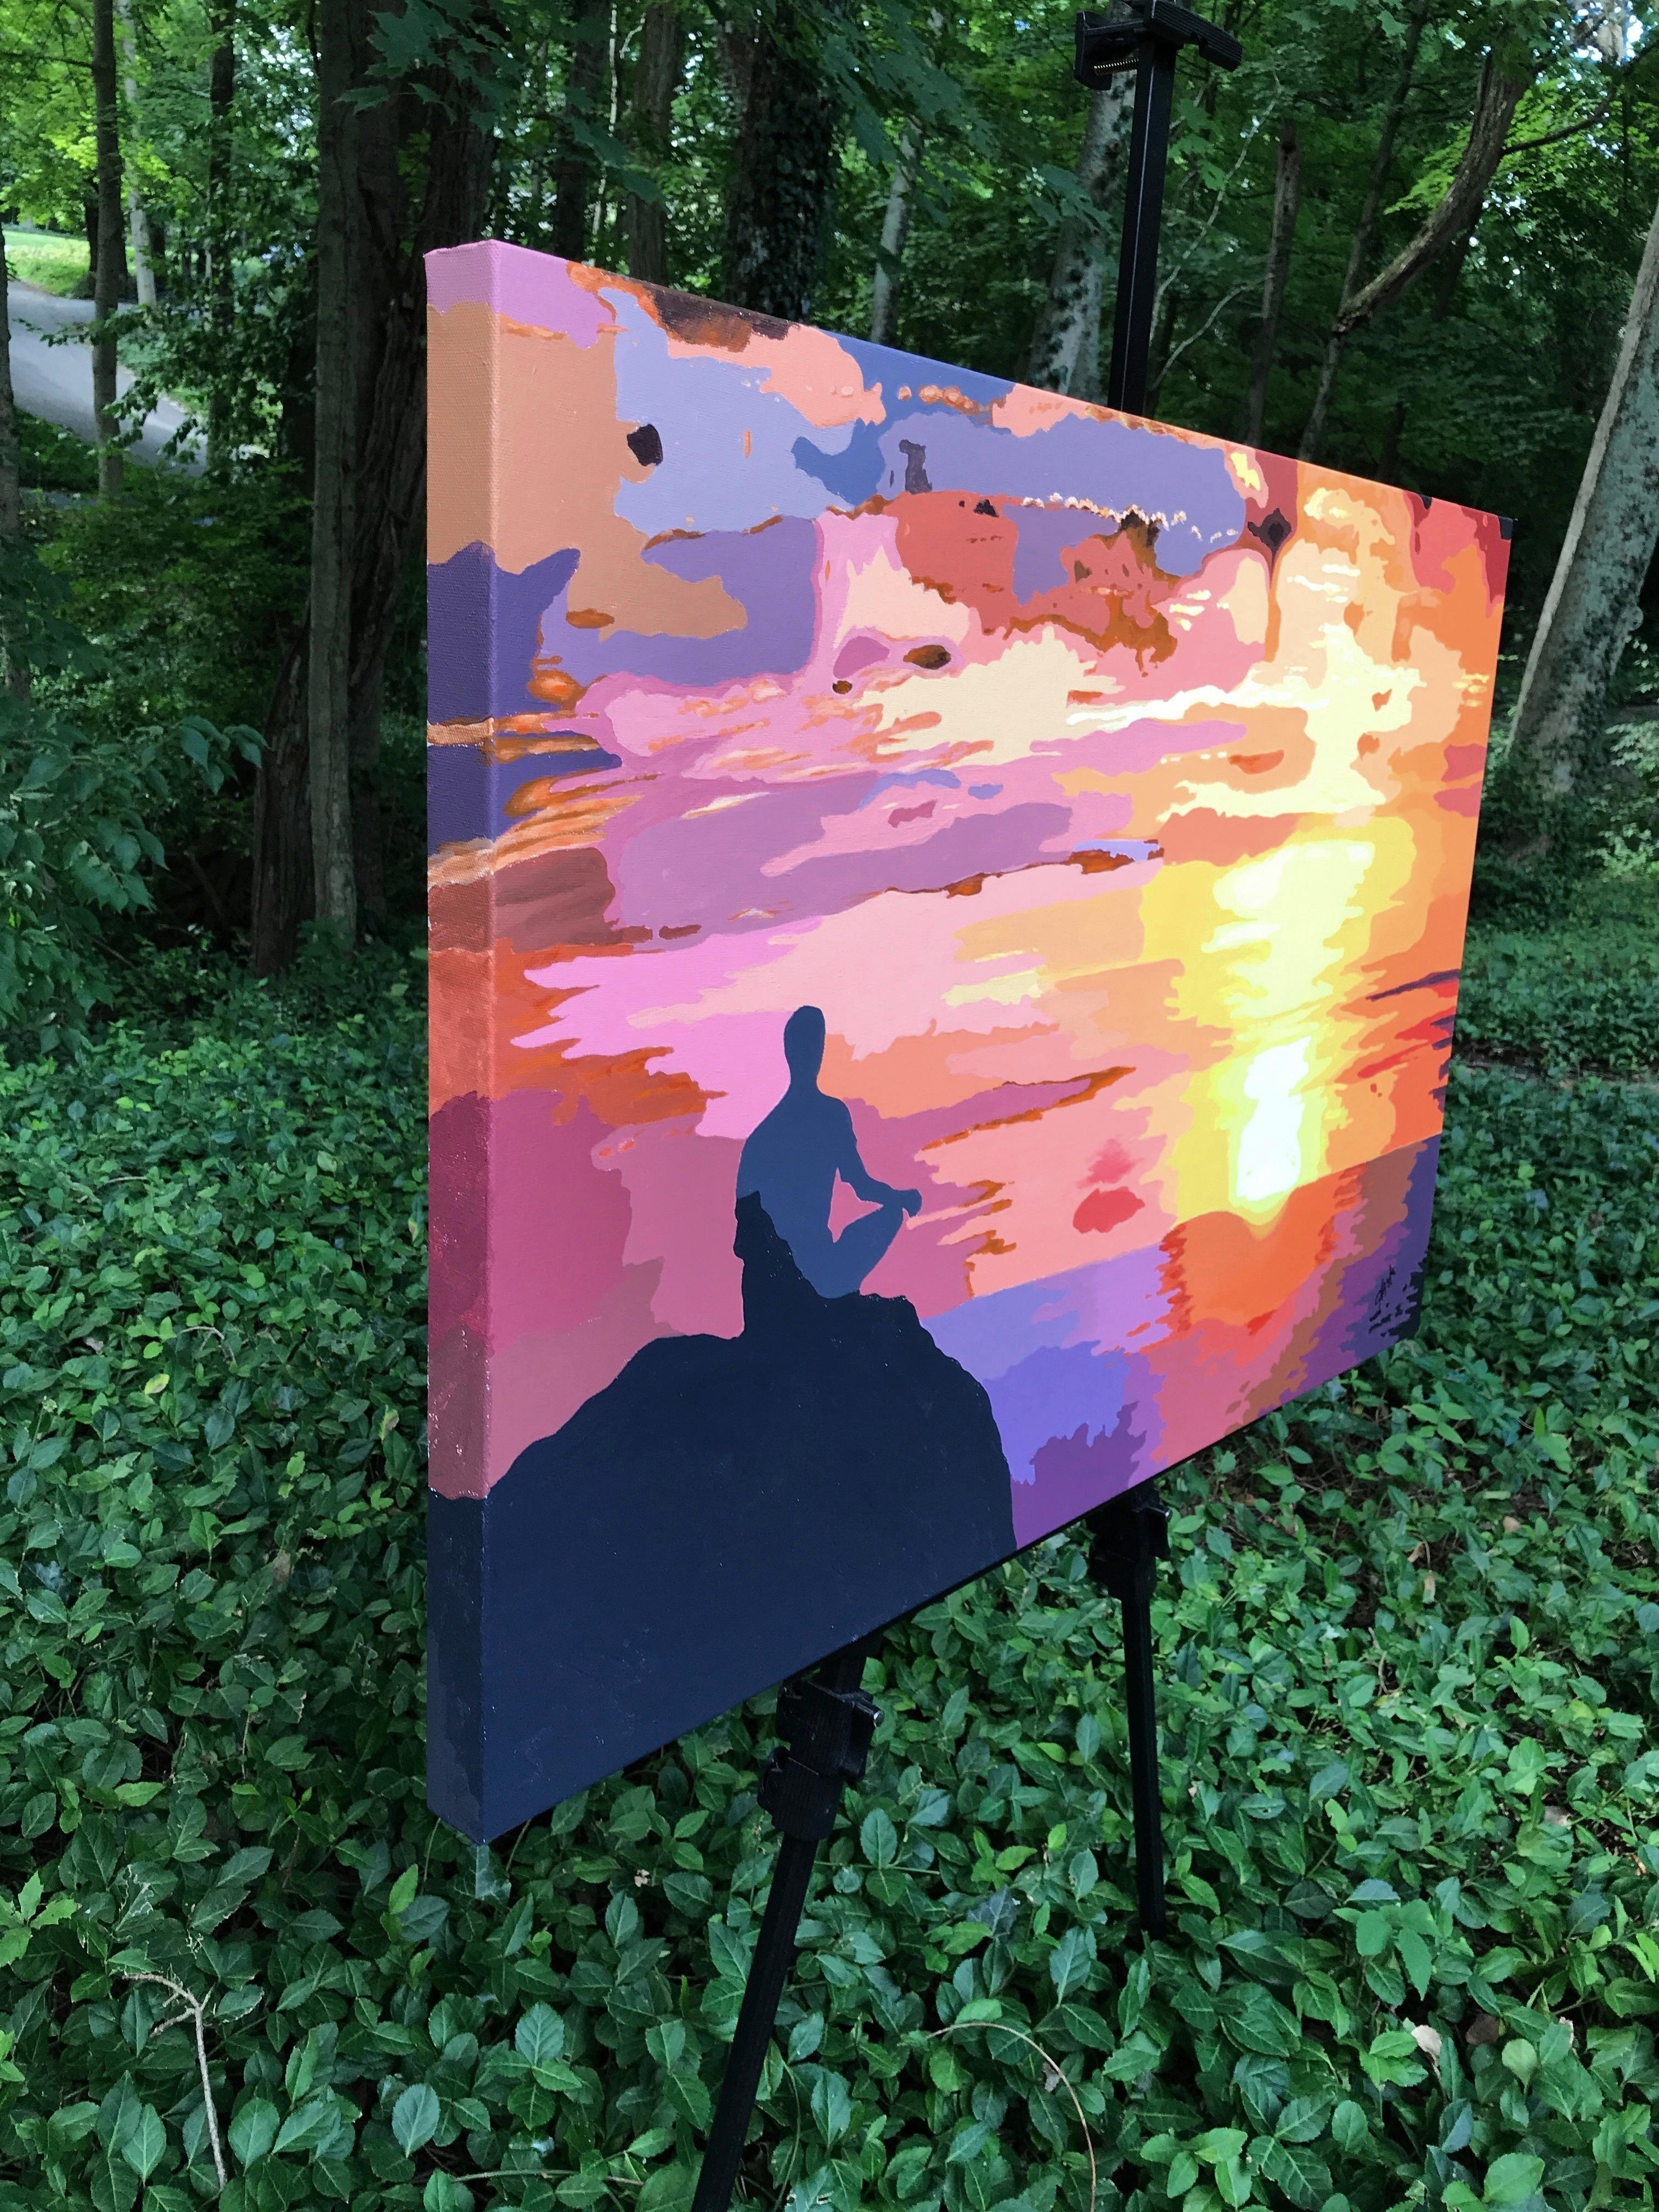 Meditations on a Sunset, Original Painting - Pink Landscape Painting by John Jaster